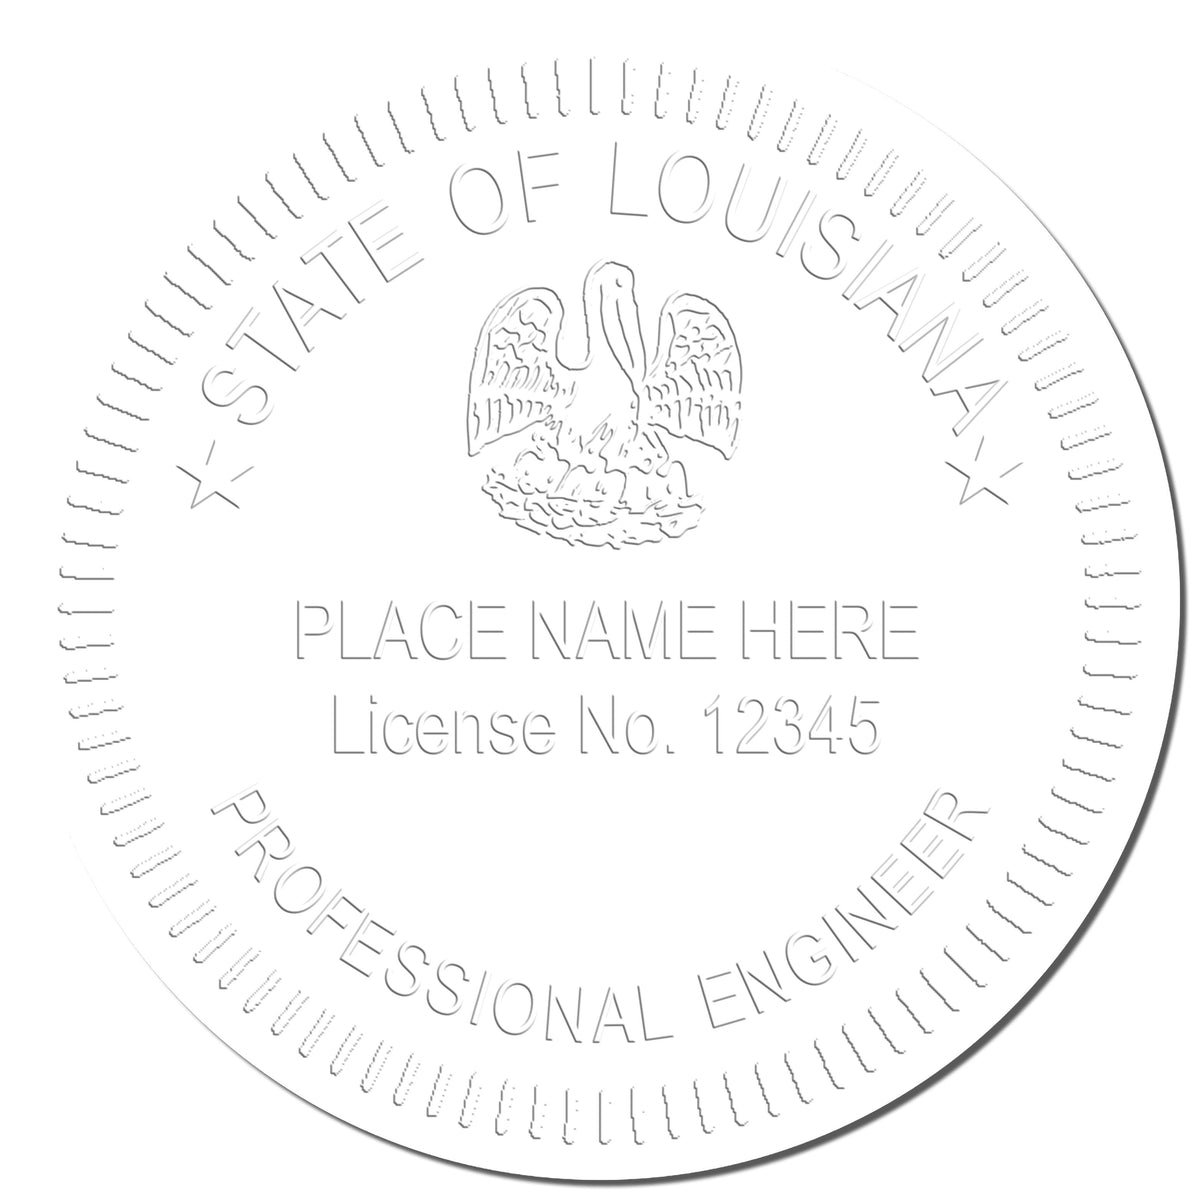 The Soft Louisiana Professional Engineer Seal stamp impression comes to life with a crisp, detailed photo on paper - showcasing true professional quality.